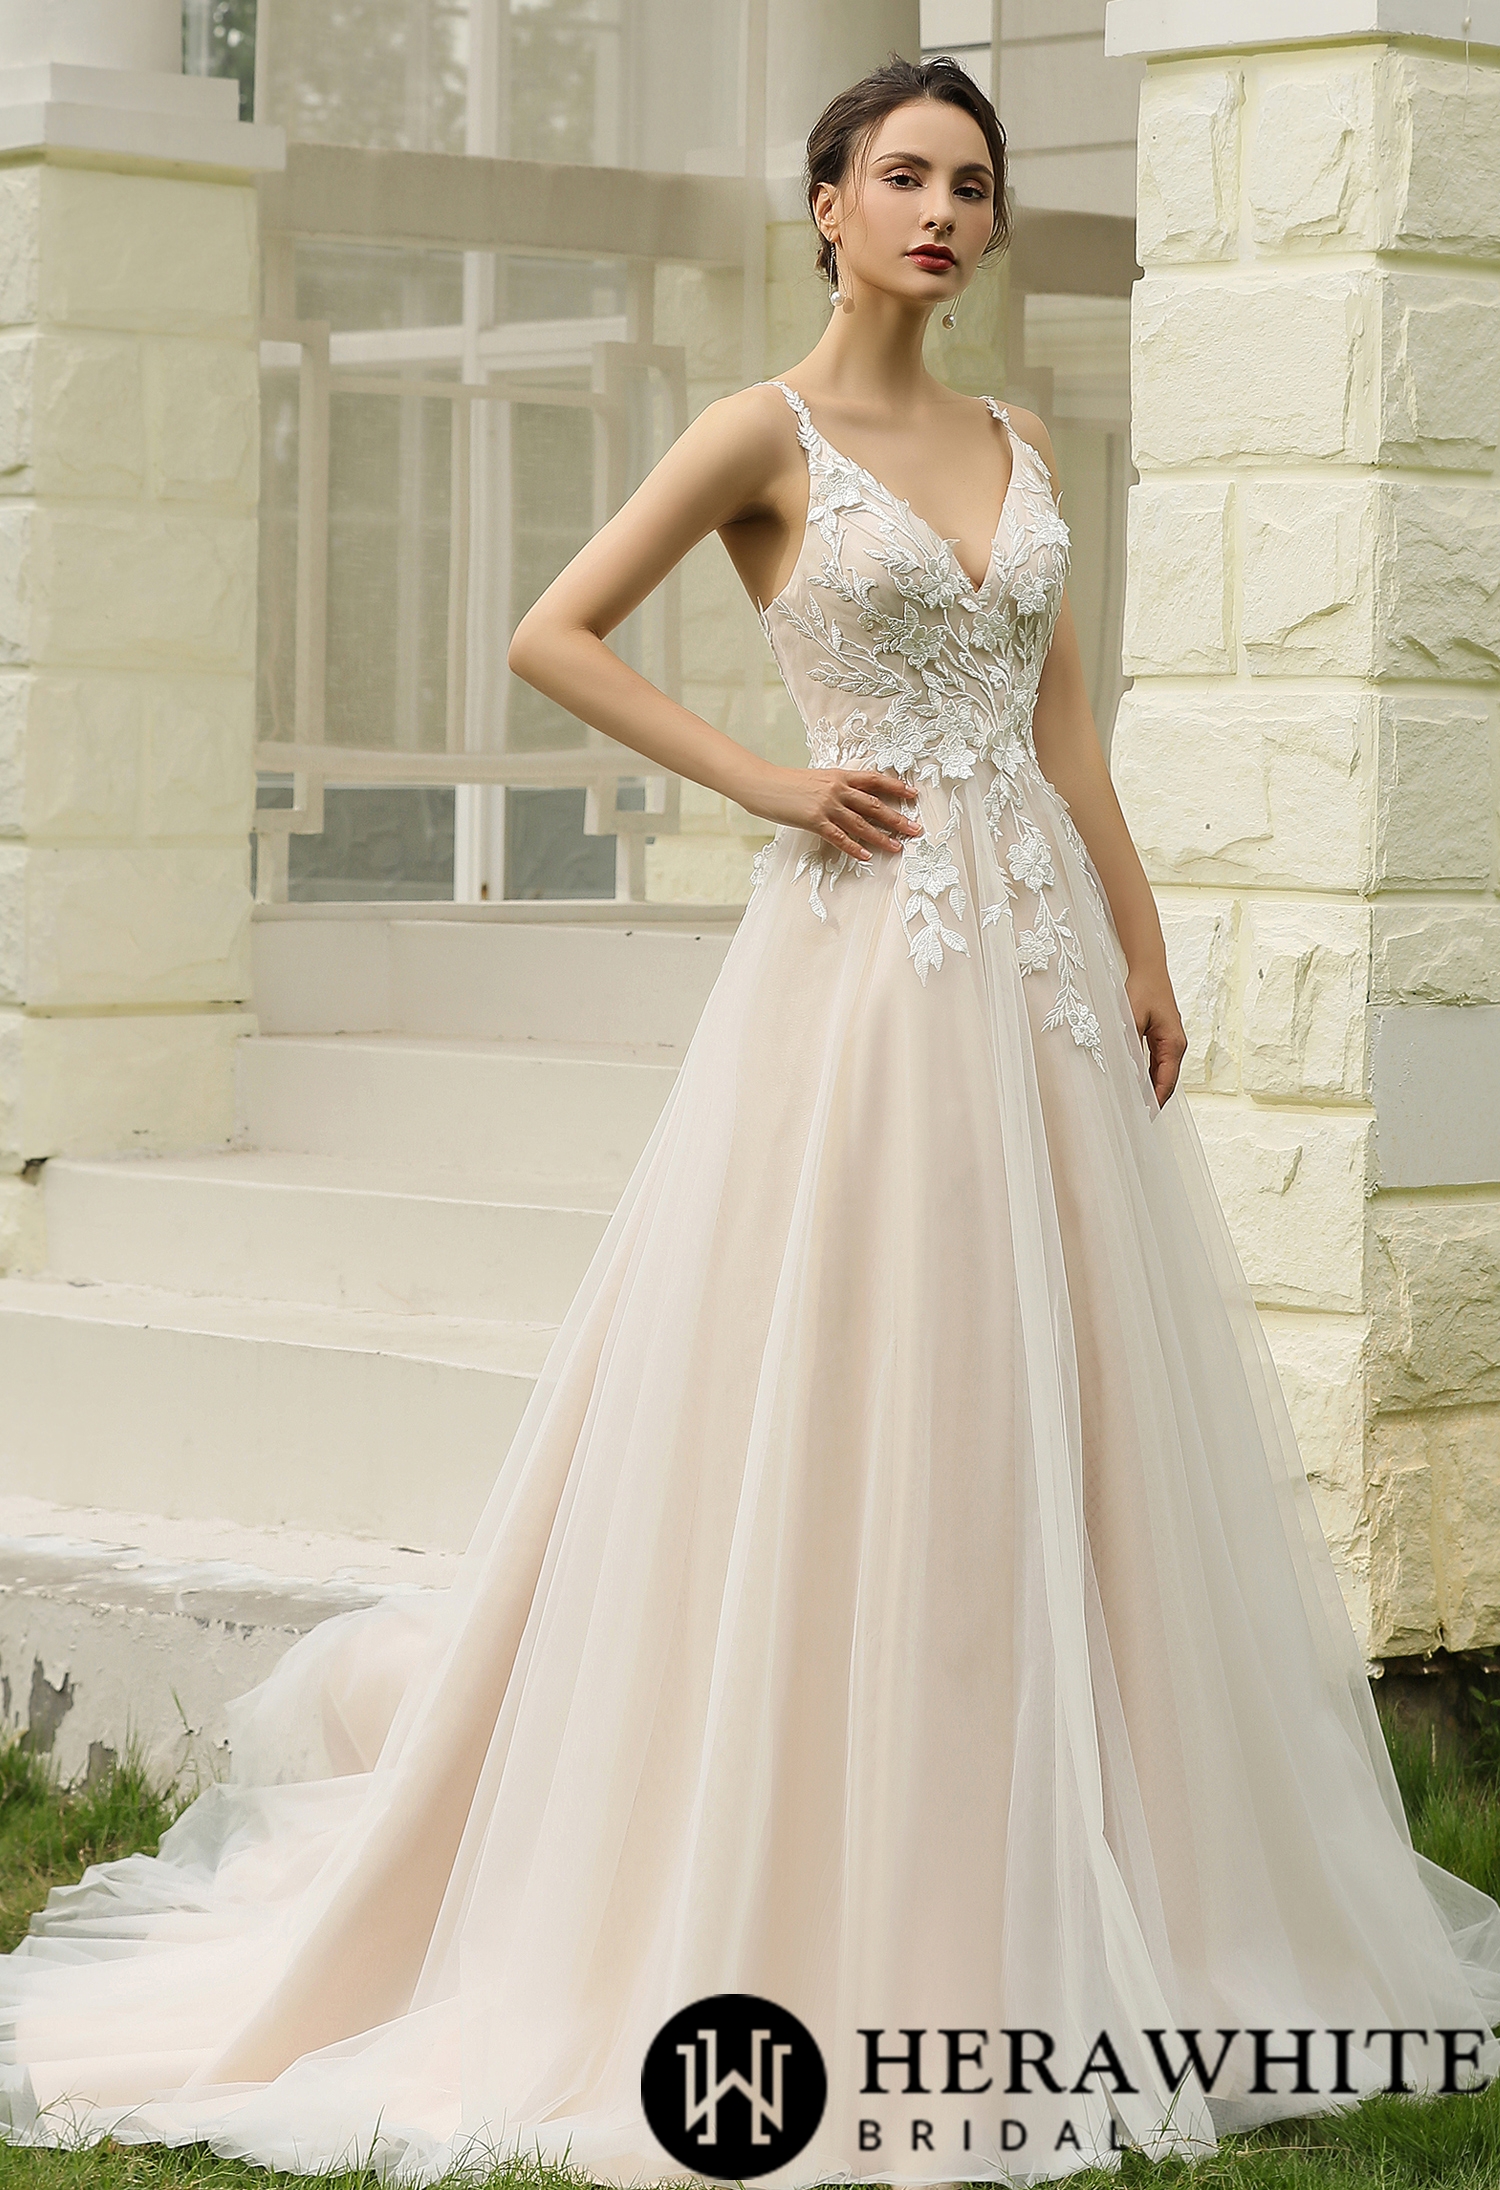 Sample Sale/ Princess Ballgown with Floral Lace Straps